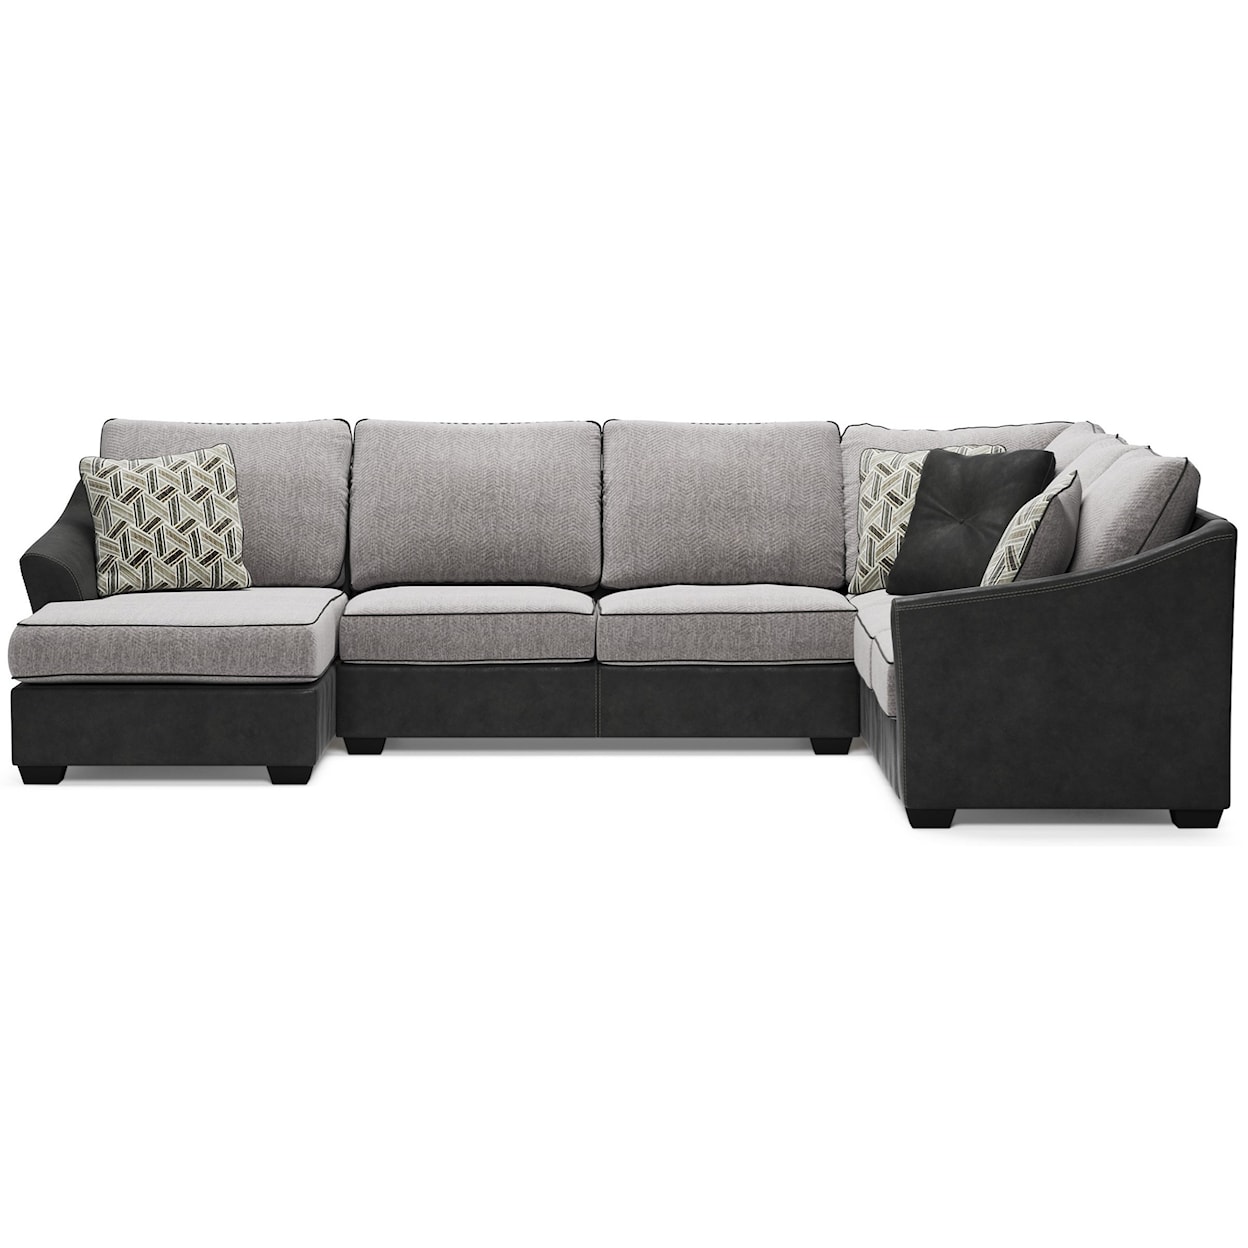 Ashley Furniture Signature Design Bilgray Sectional with Left Chaise